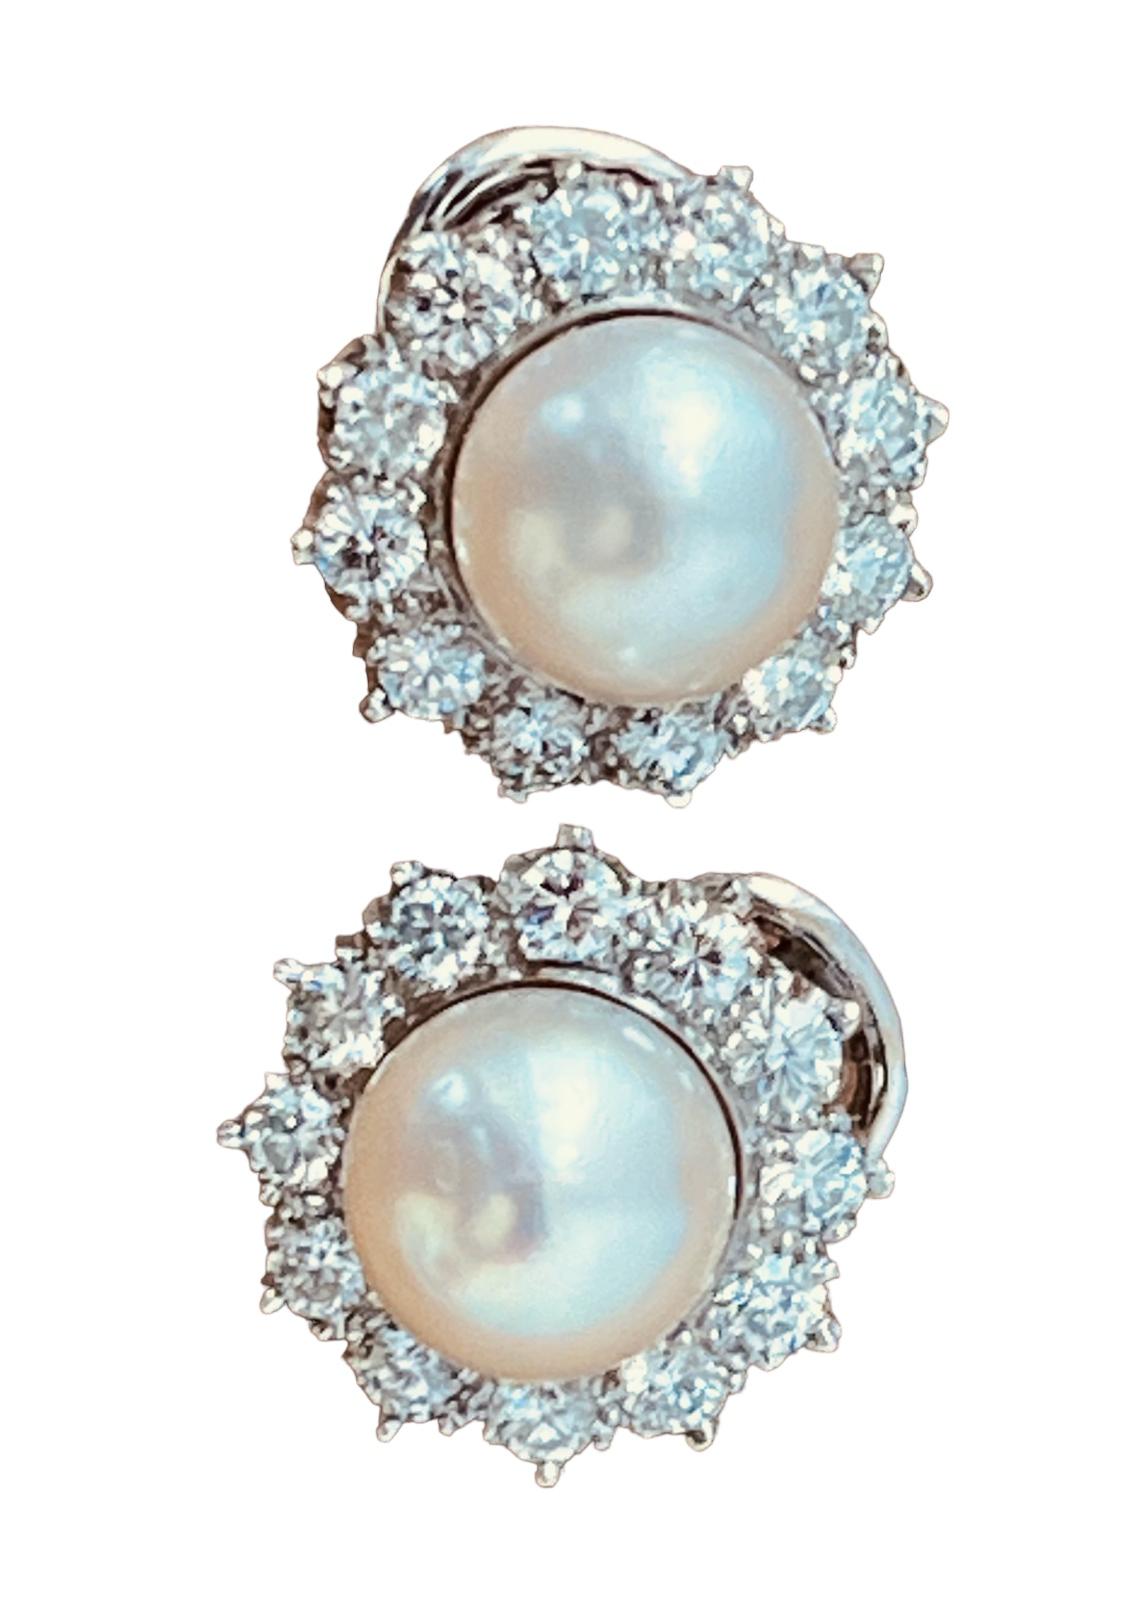 A pair of cultured pearl and diamond earclips mounted in platinum, 10.1 grams gross weight. Total diameter: 1.2cm (12mm). The 9mm cultured pearls surrounded by round brilliant cut diamonds weighing a total 2.40ct. G/H colour, VS quality. Circa